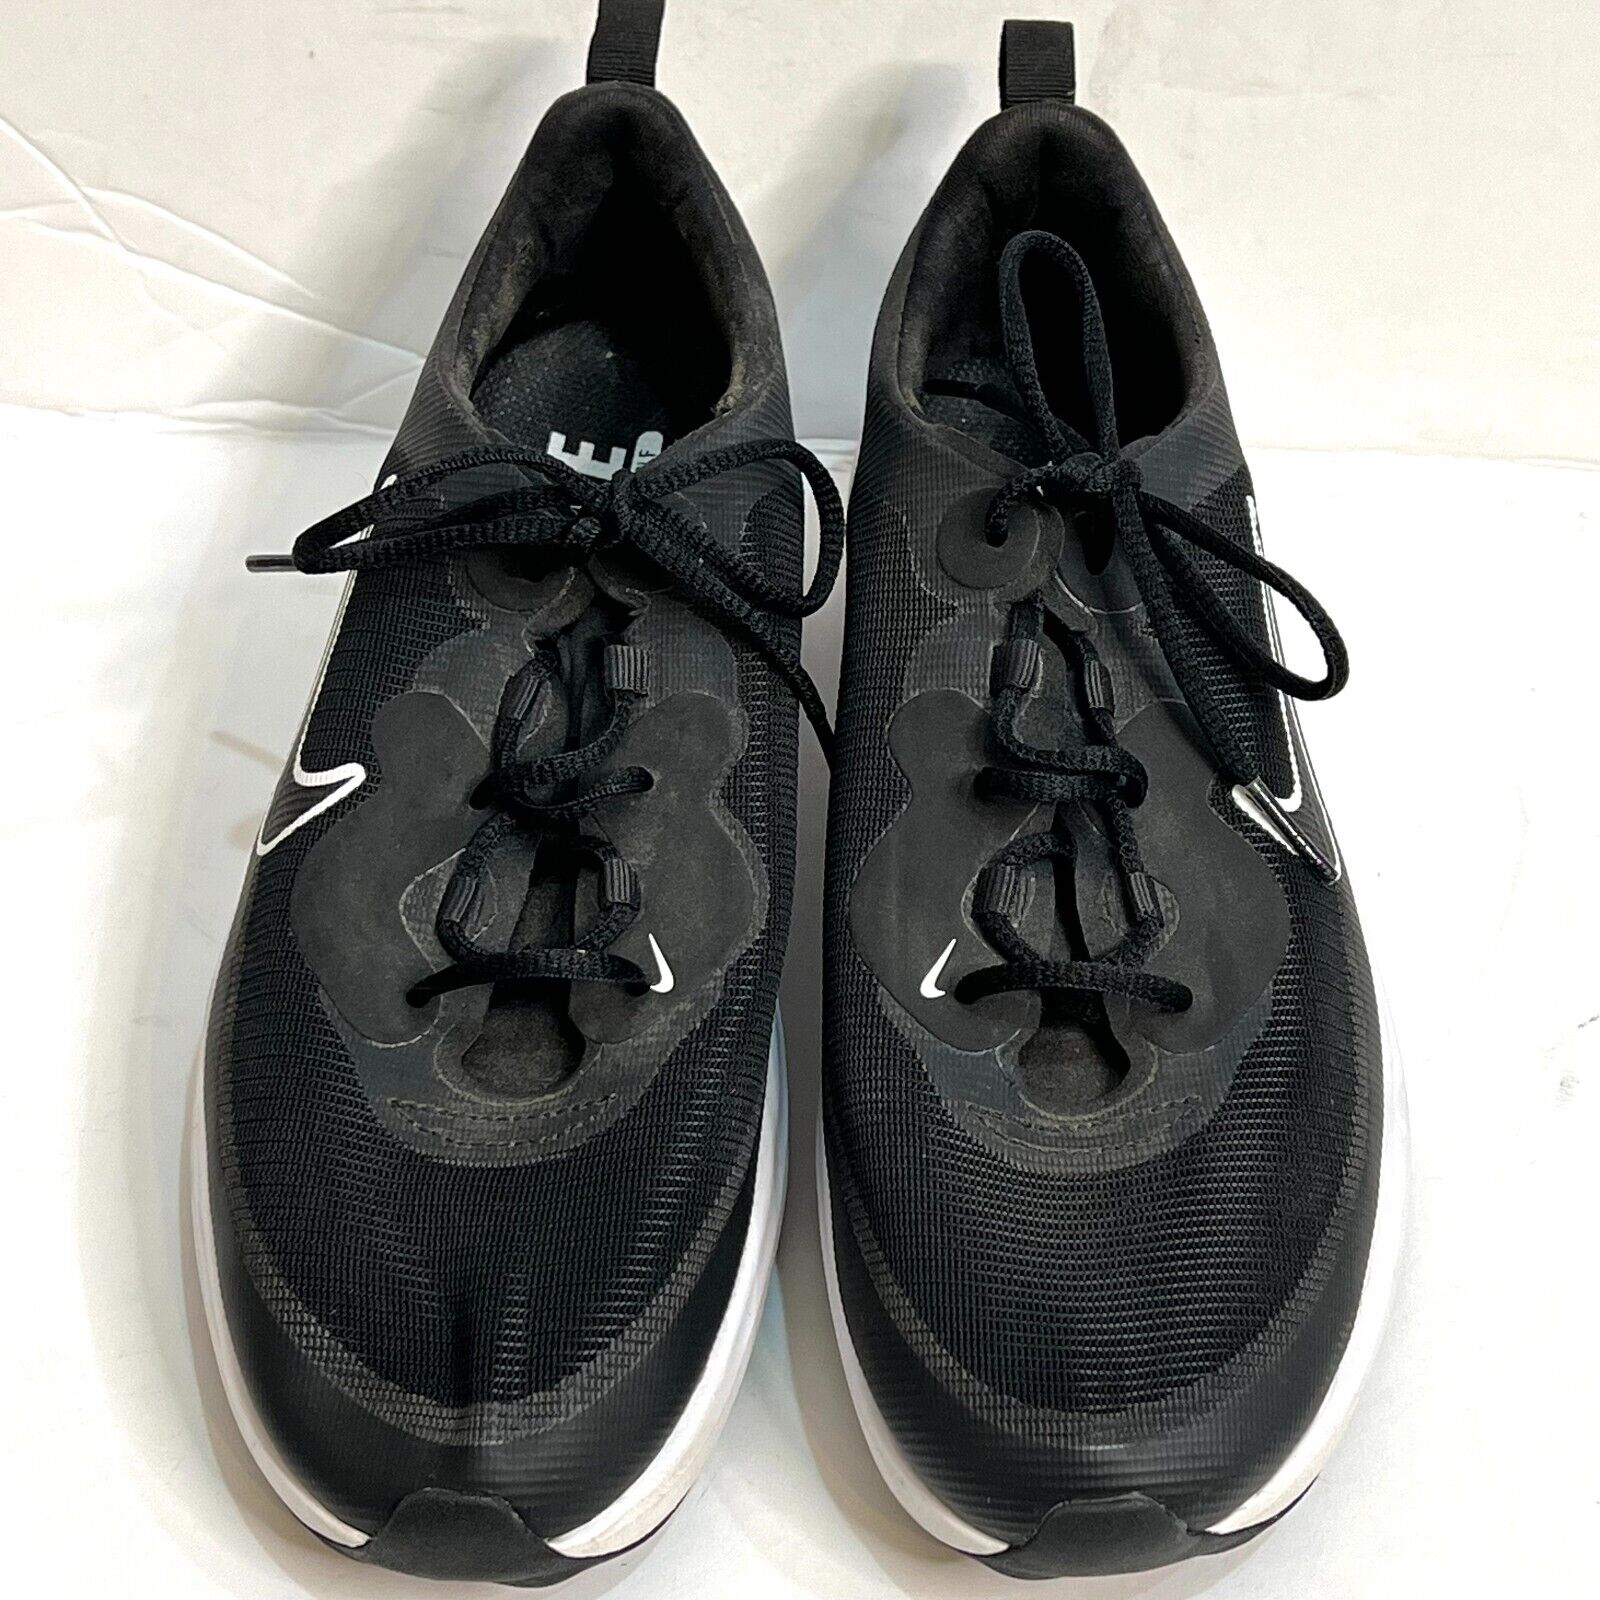 NIKE Womens ACE Summerlite Black White Spikeless Golf Shoes Size 8